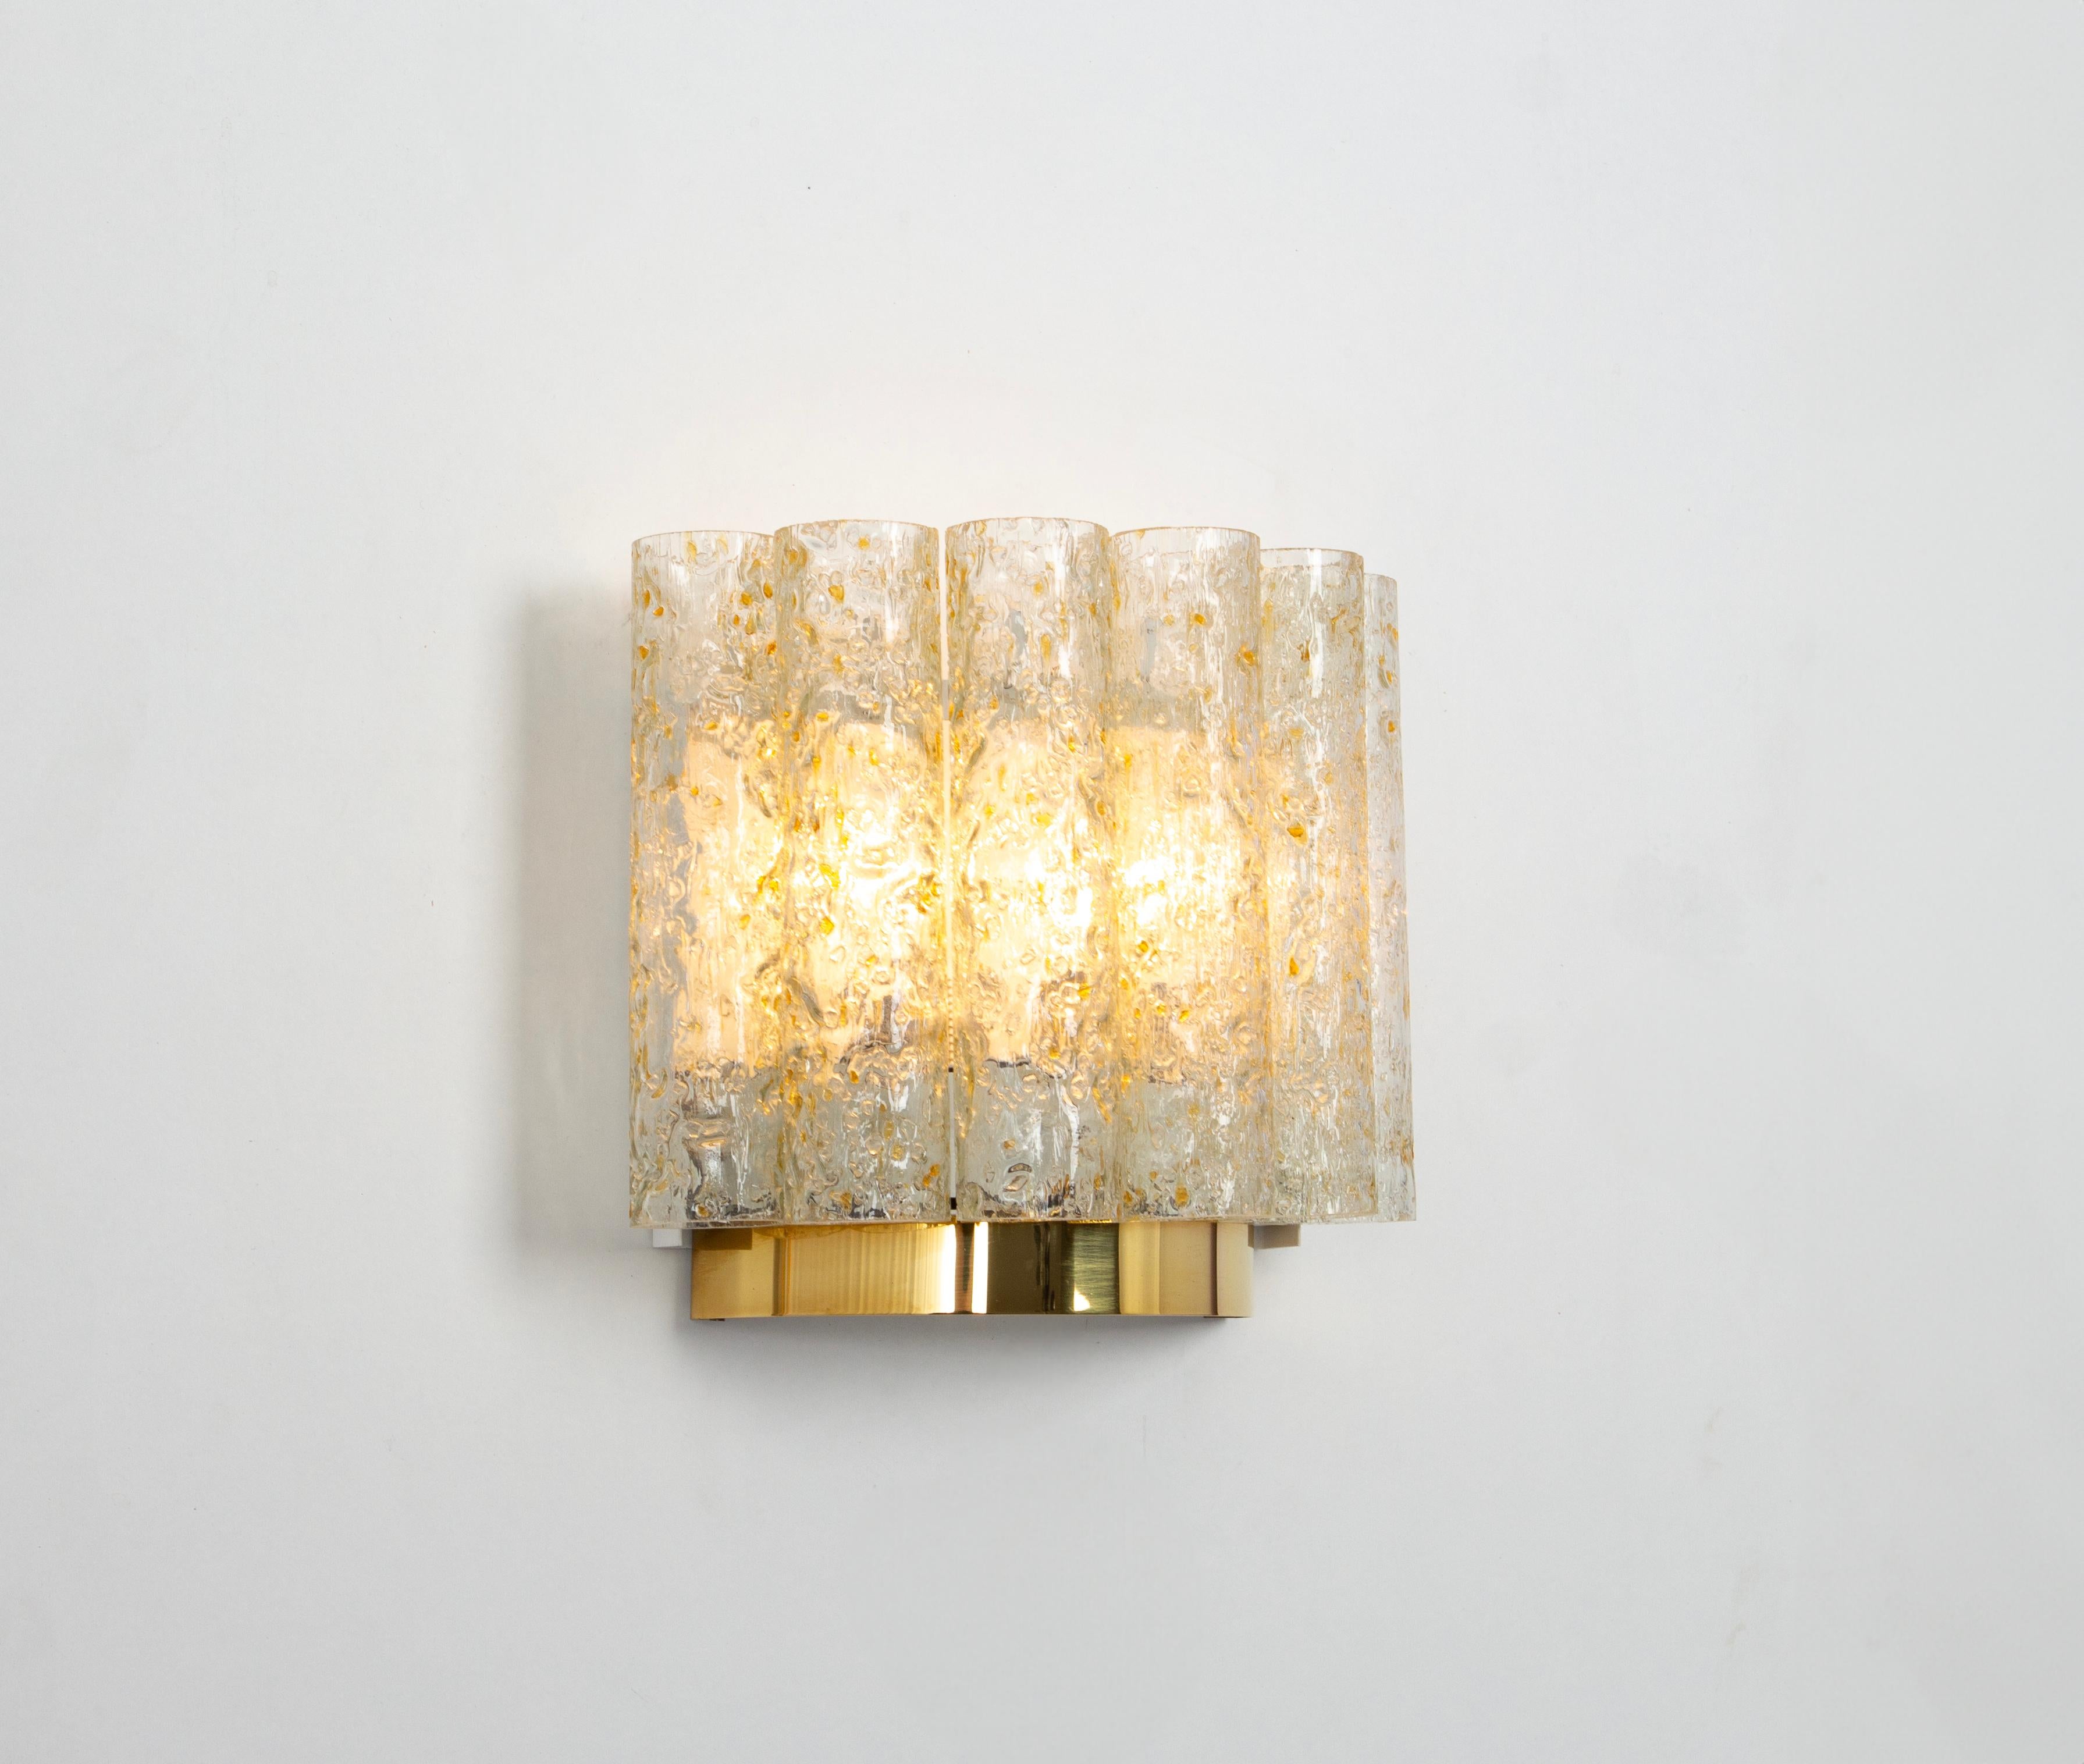 Wonderful pair of midcentury wall sconces with ice glass tubes, made by Doria Leuchten, Germany, manufactured, circa 1960-1969.

High quality and in very good condition. Cleaned, well-wired and ready to use. 

Each sconce requires 2 x E14 Standard